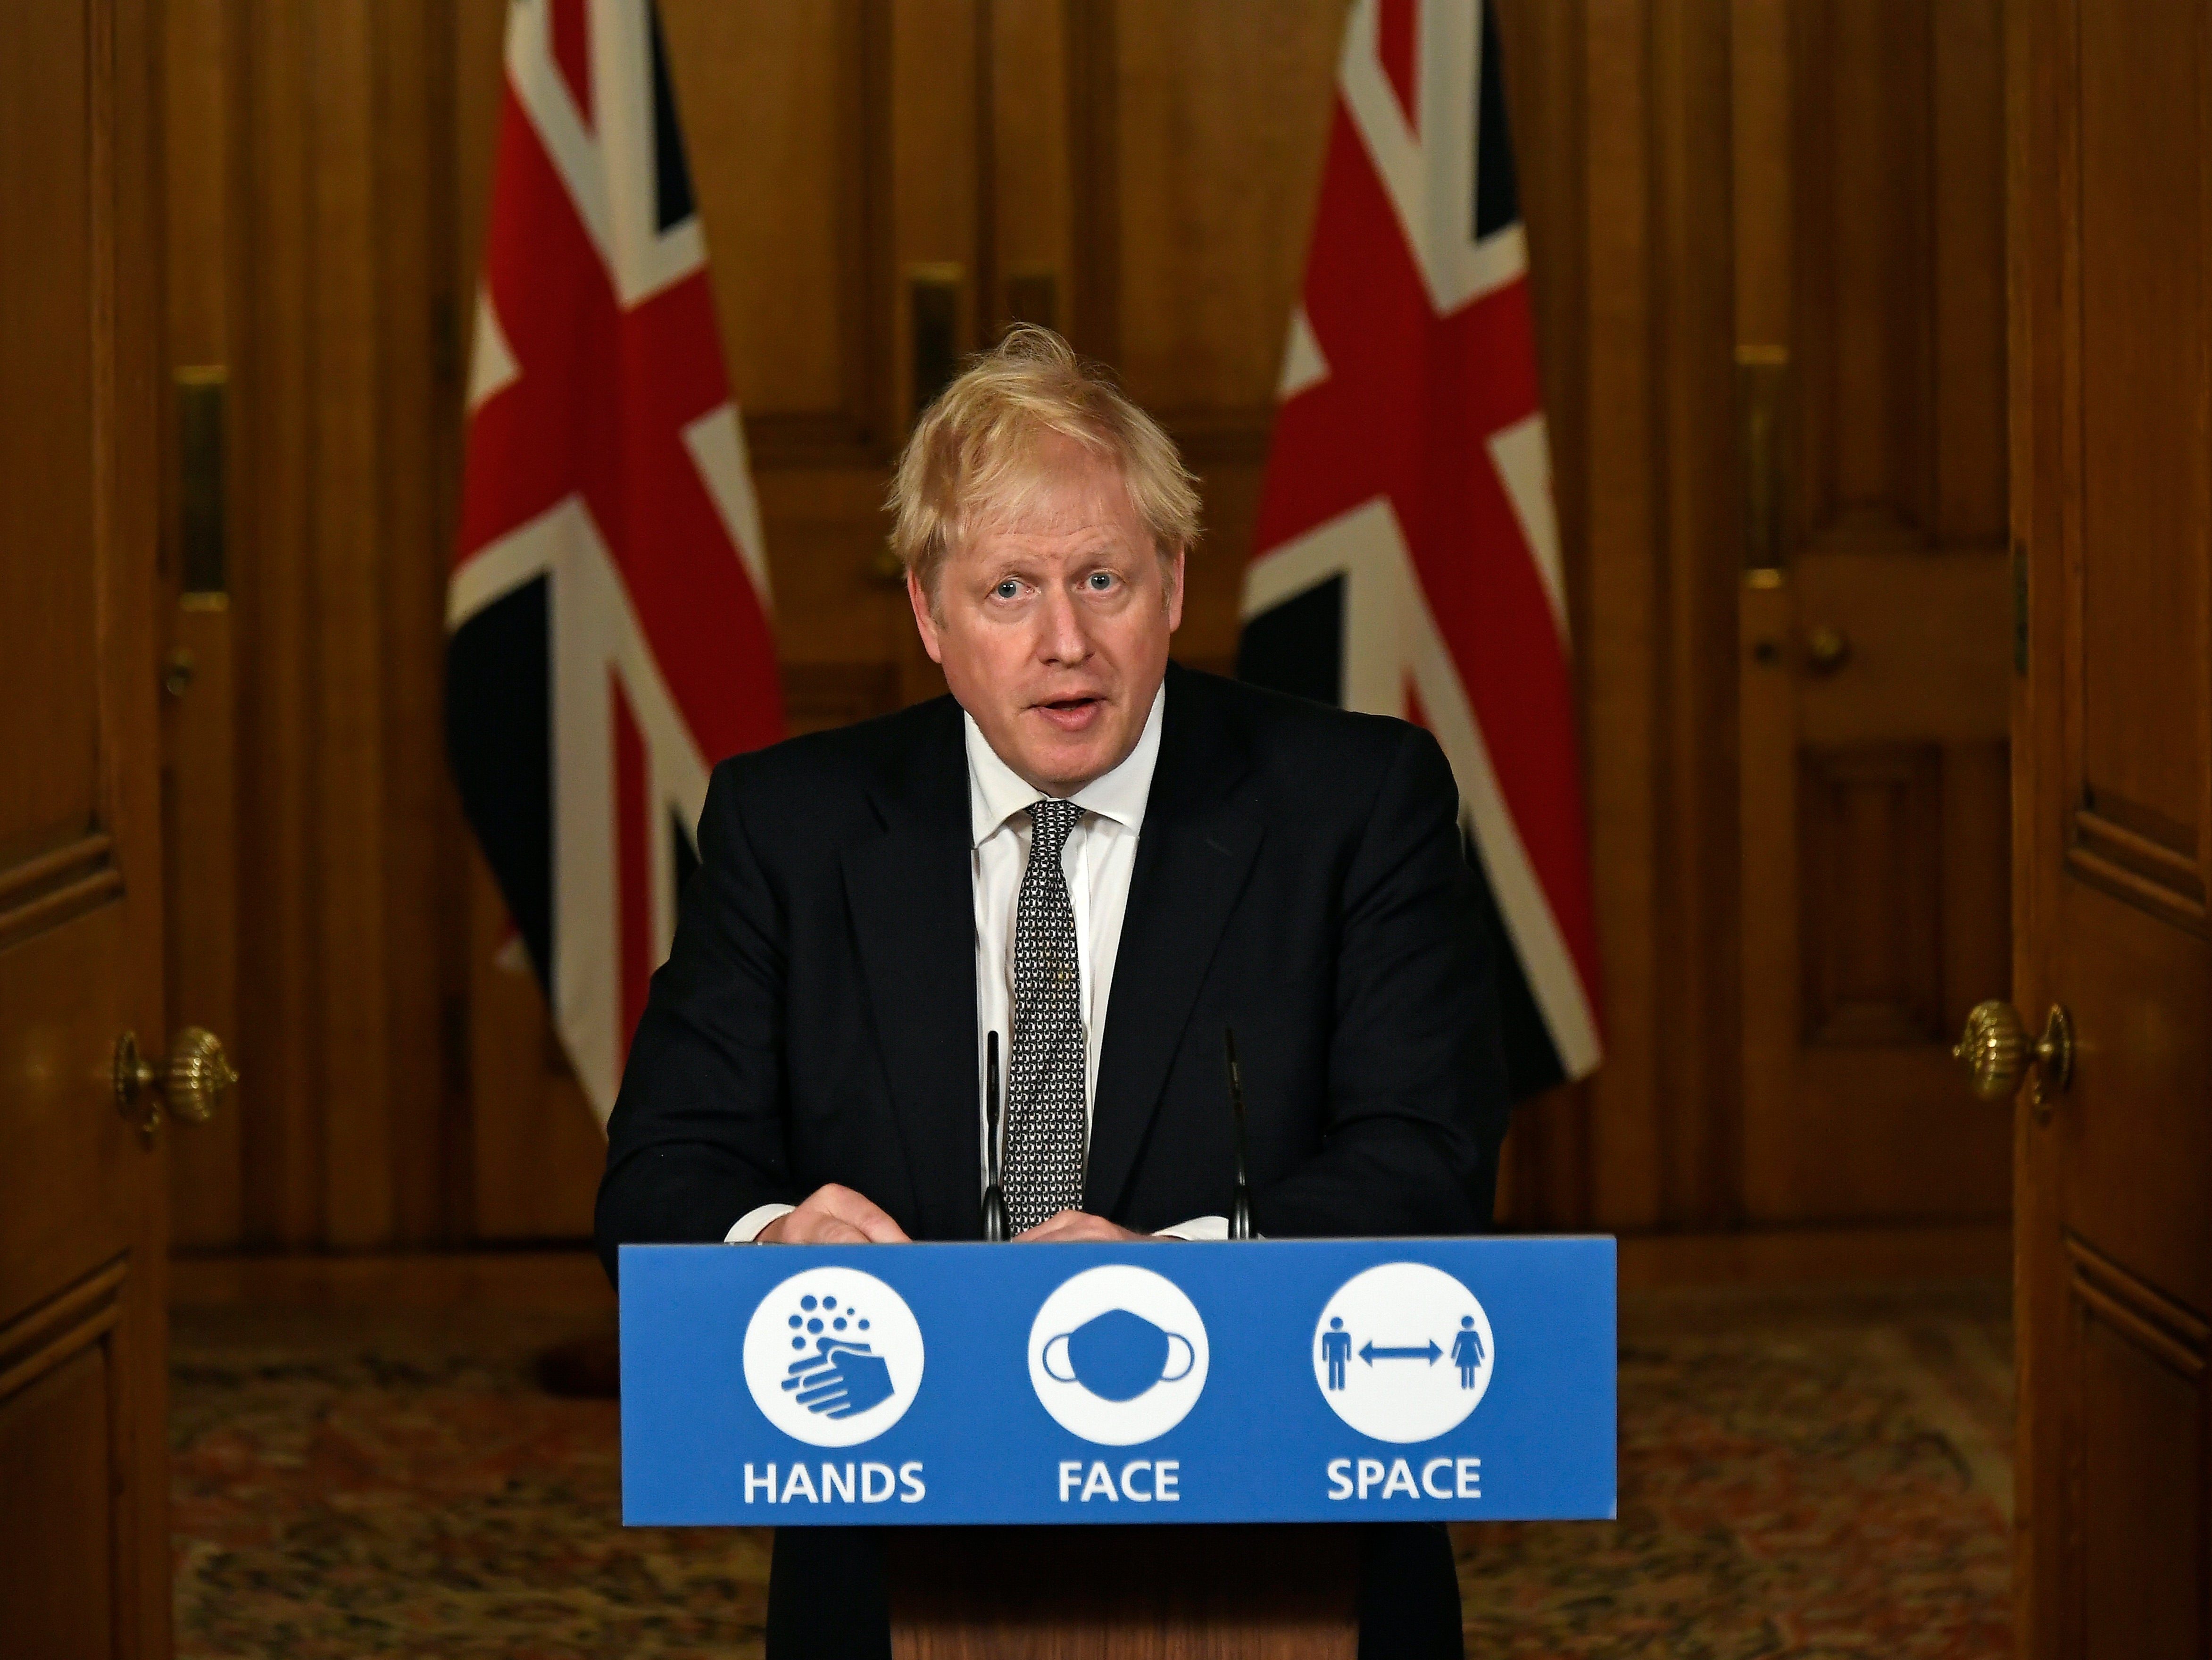 Boris Johnson has announced another lockdown in a bid to curb the second wave